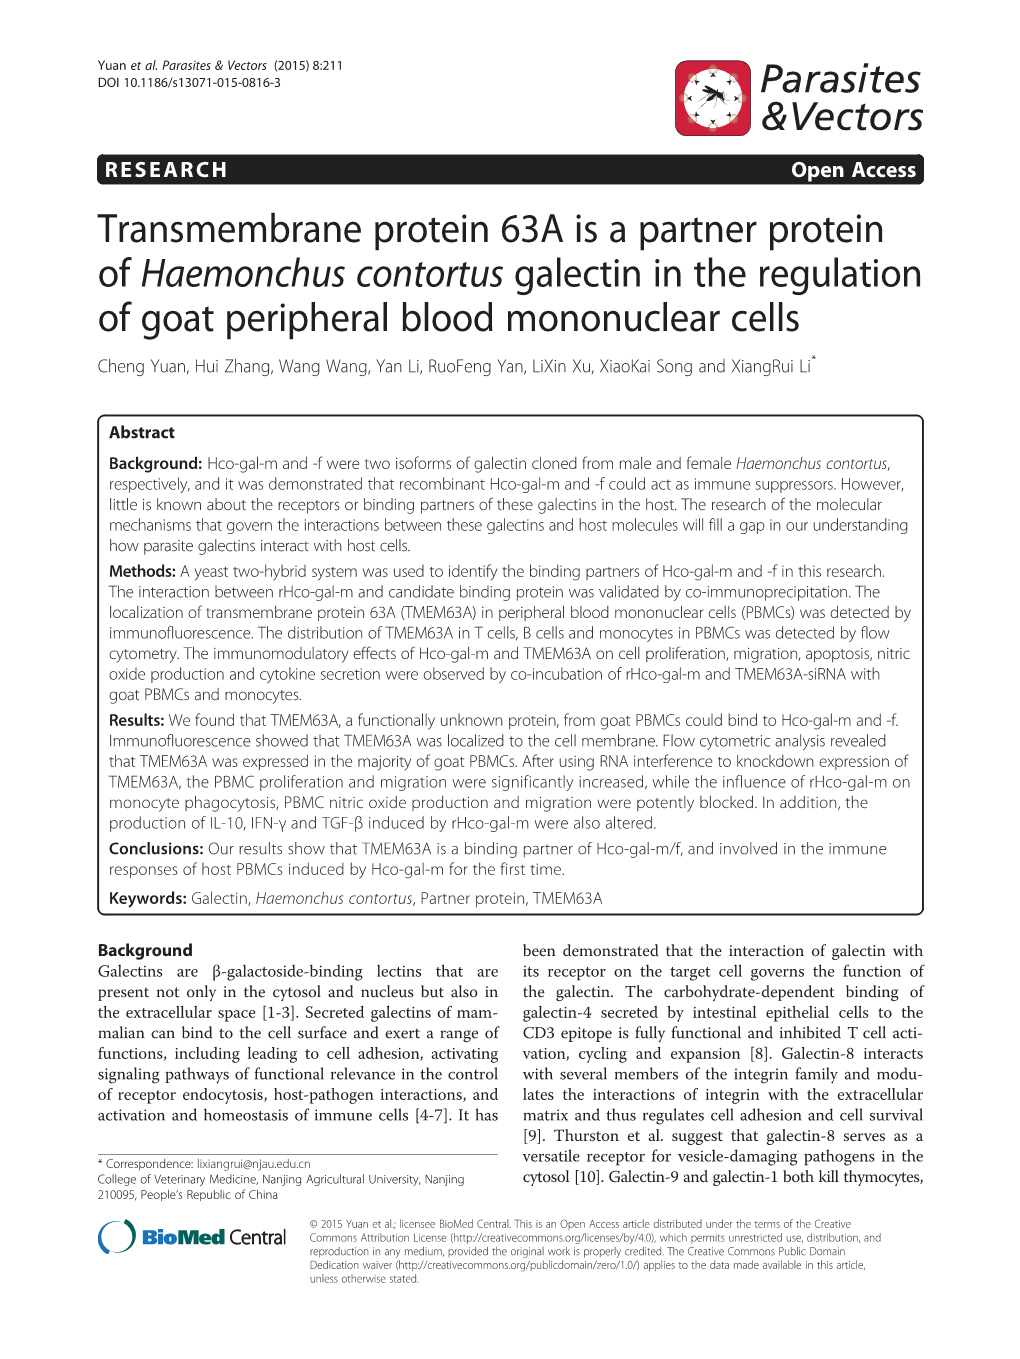 Transmembrane Protein 63A Is a Partner Protein of Haemonchus